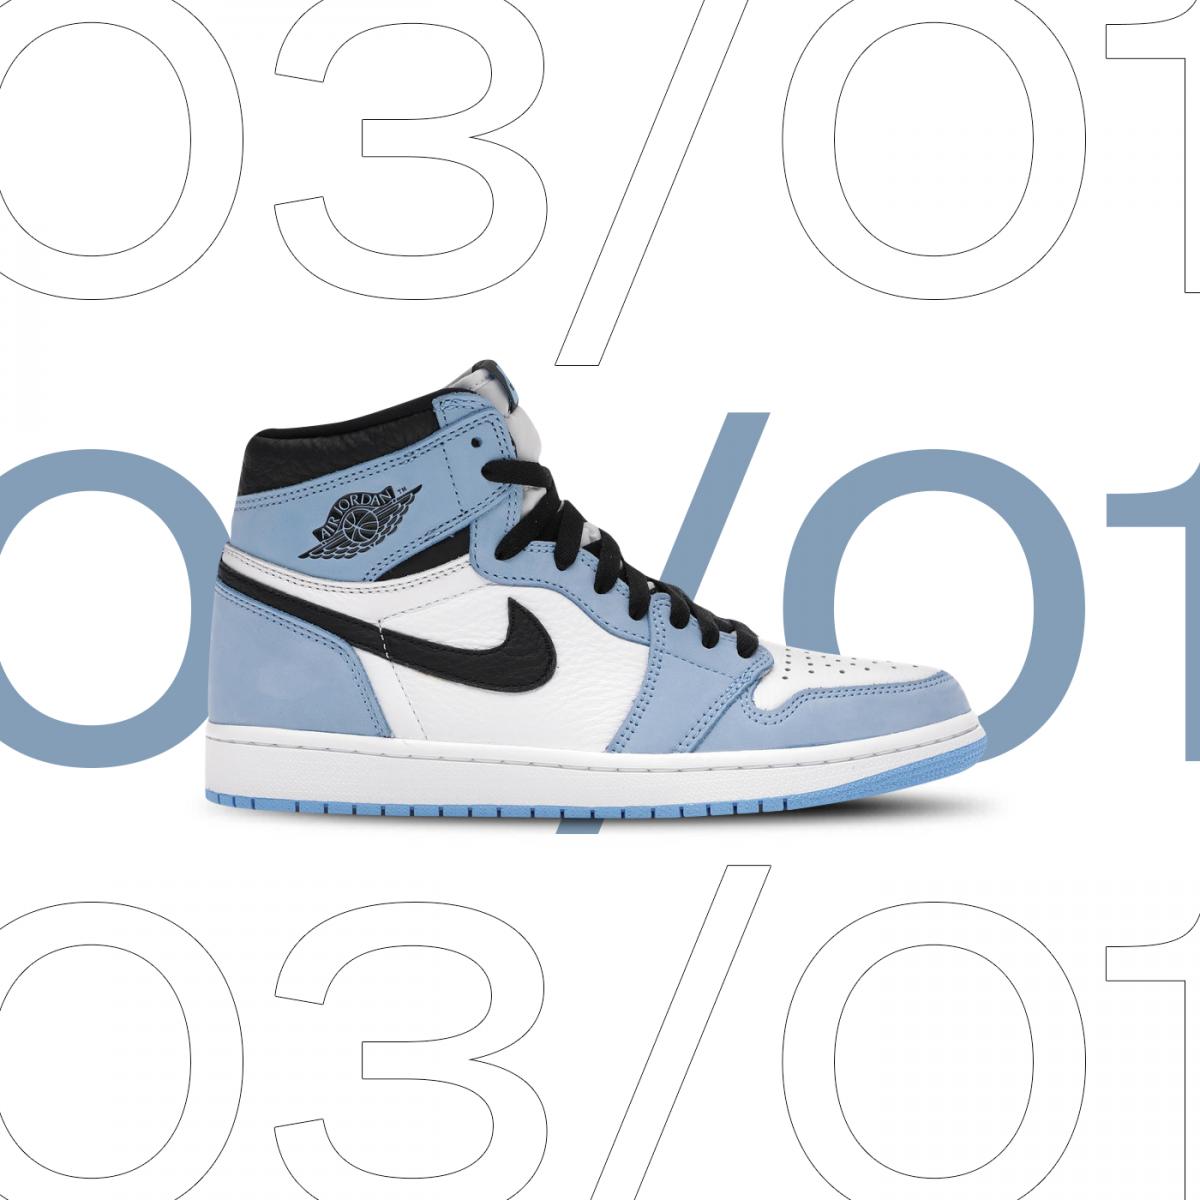 The Most Rare Air Jordans On StockX - StockX News